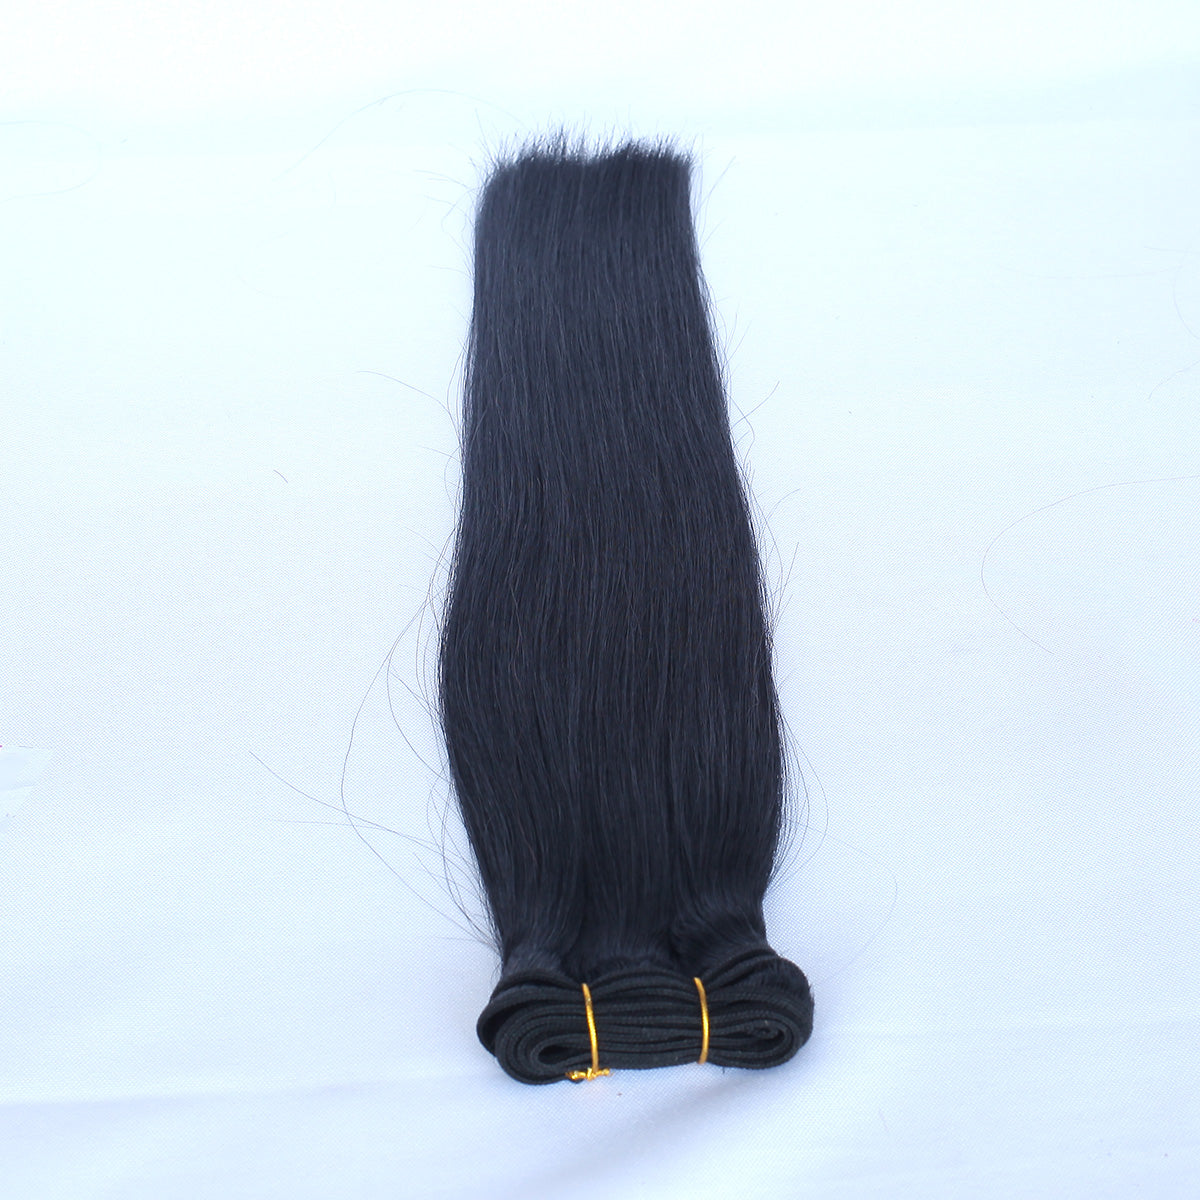 Jet Black Straight Human Hair Wefts Extensions